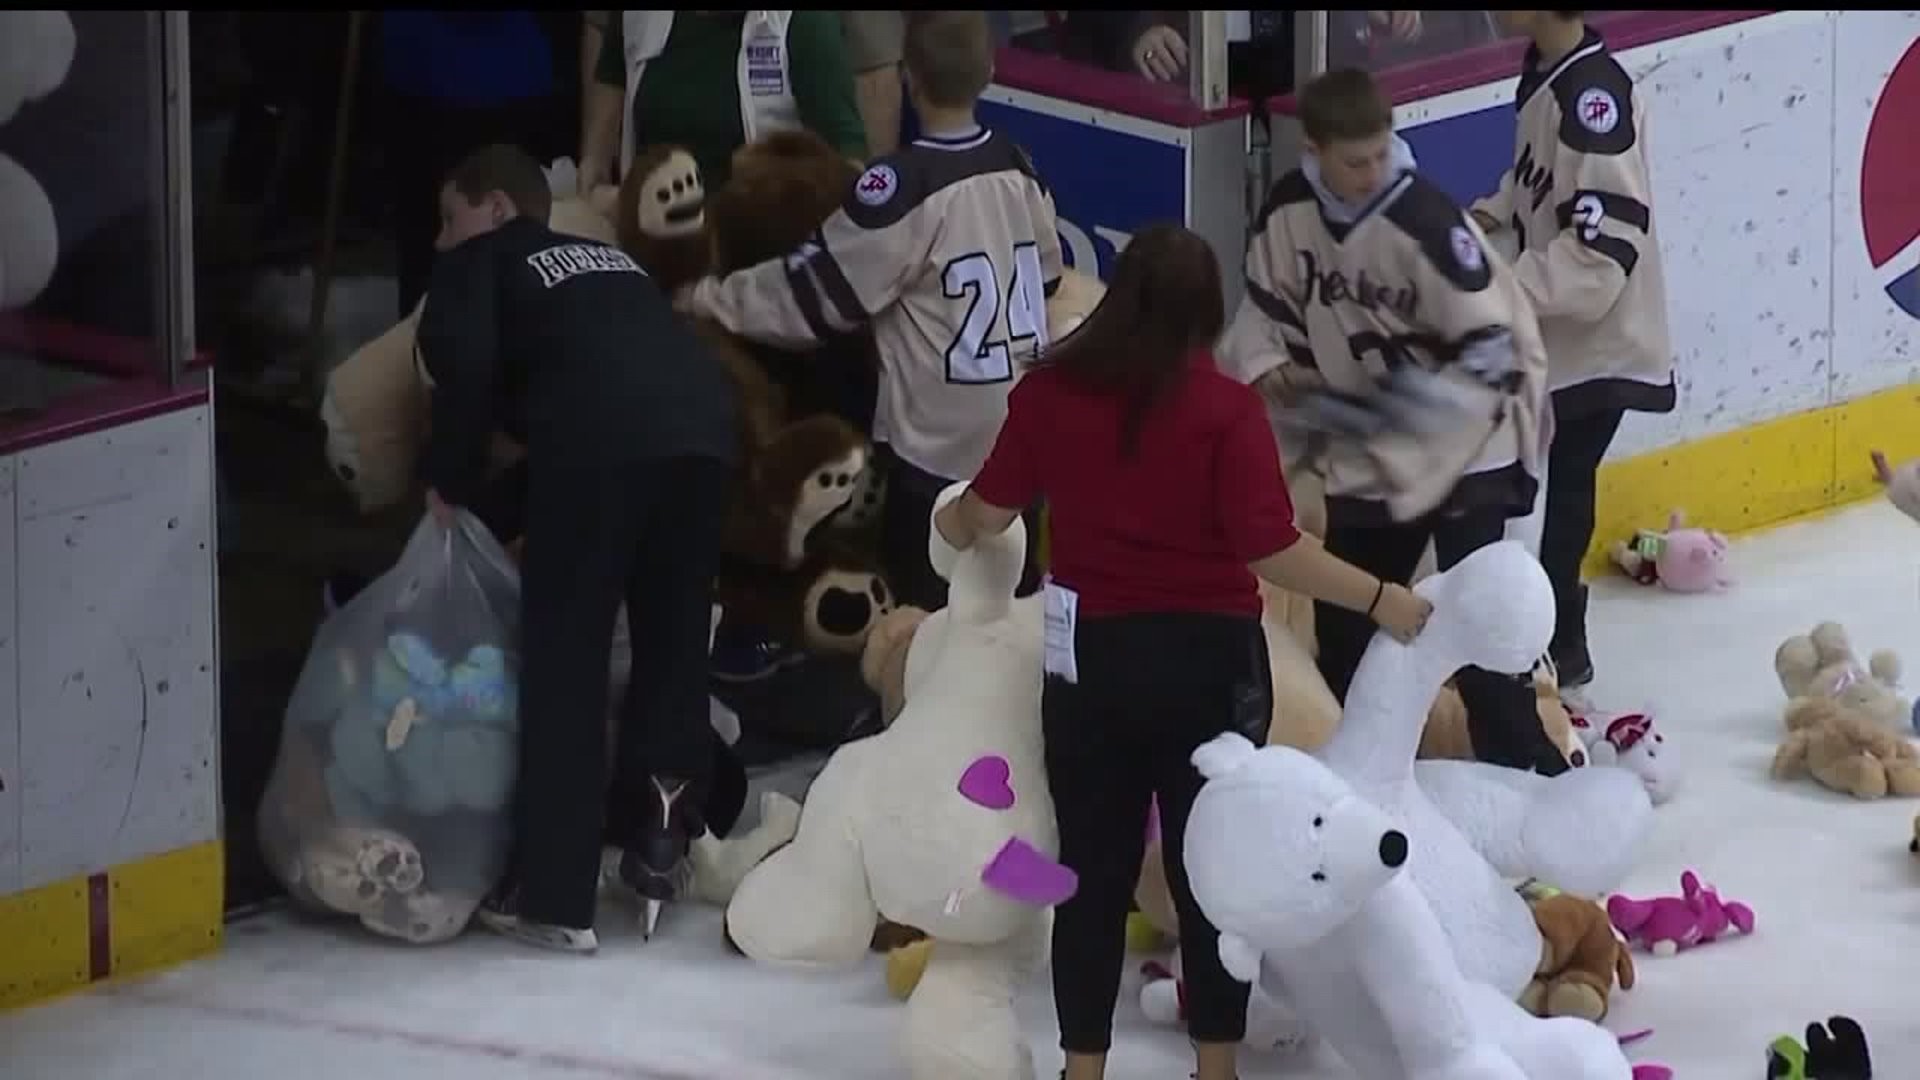 Teddy Bear Toss covers the ice at GIANT Center